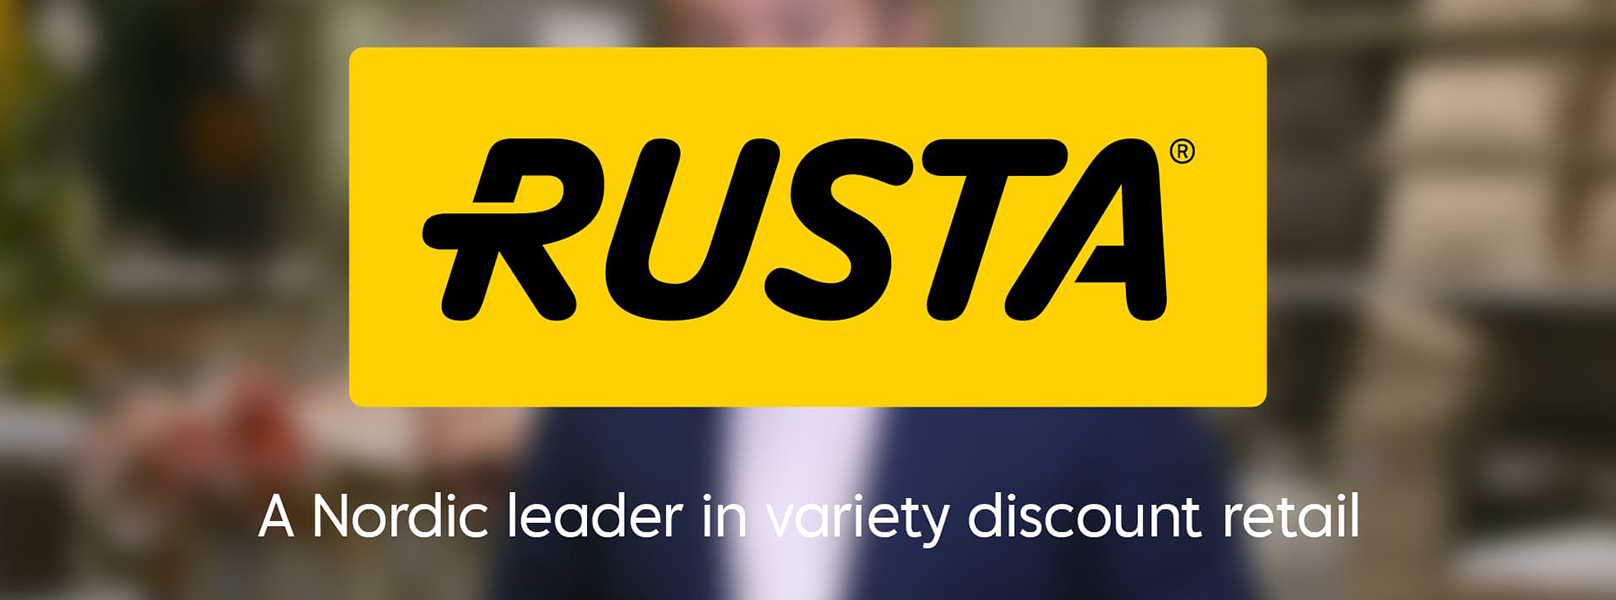 rusta-about-us-video-banner